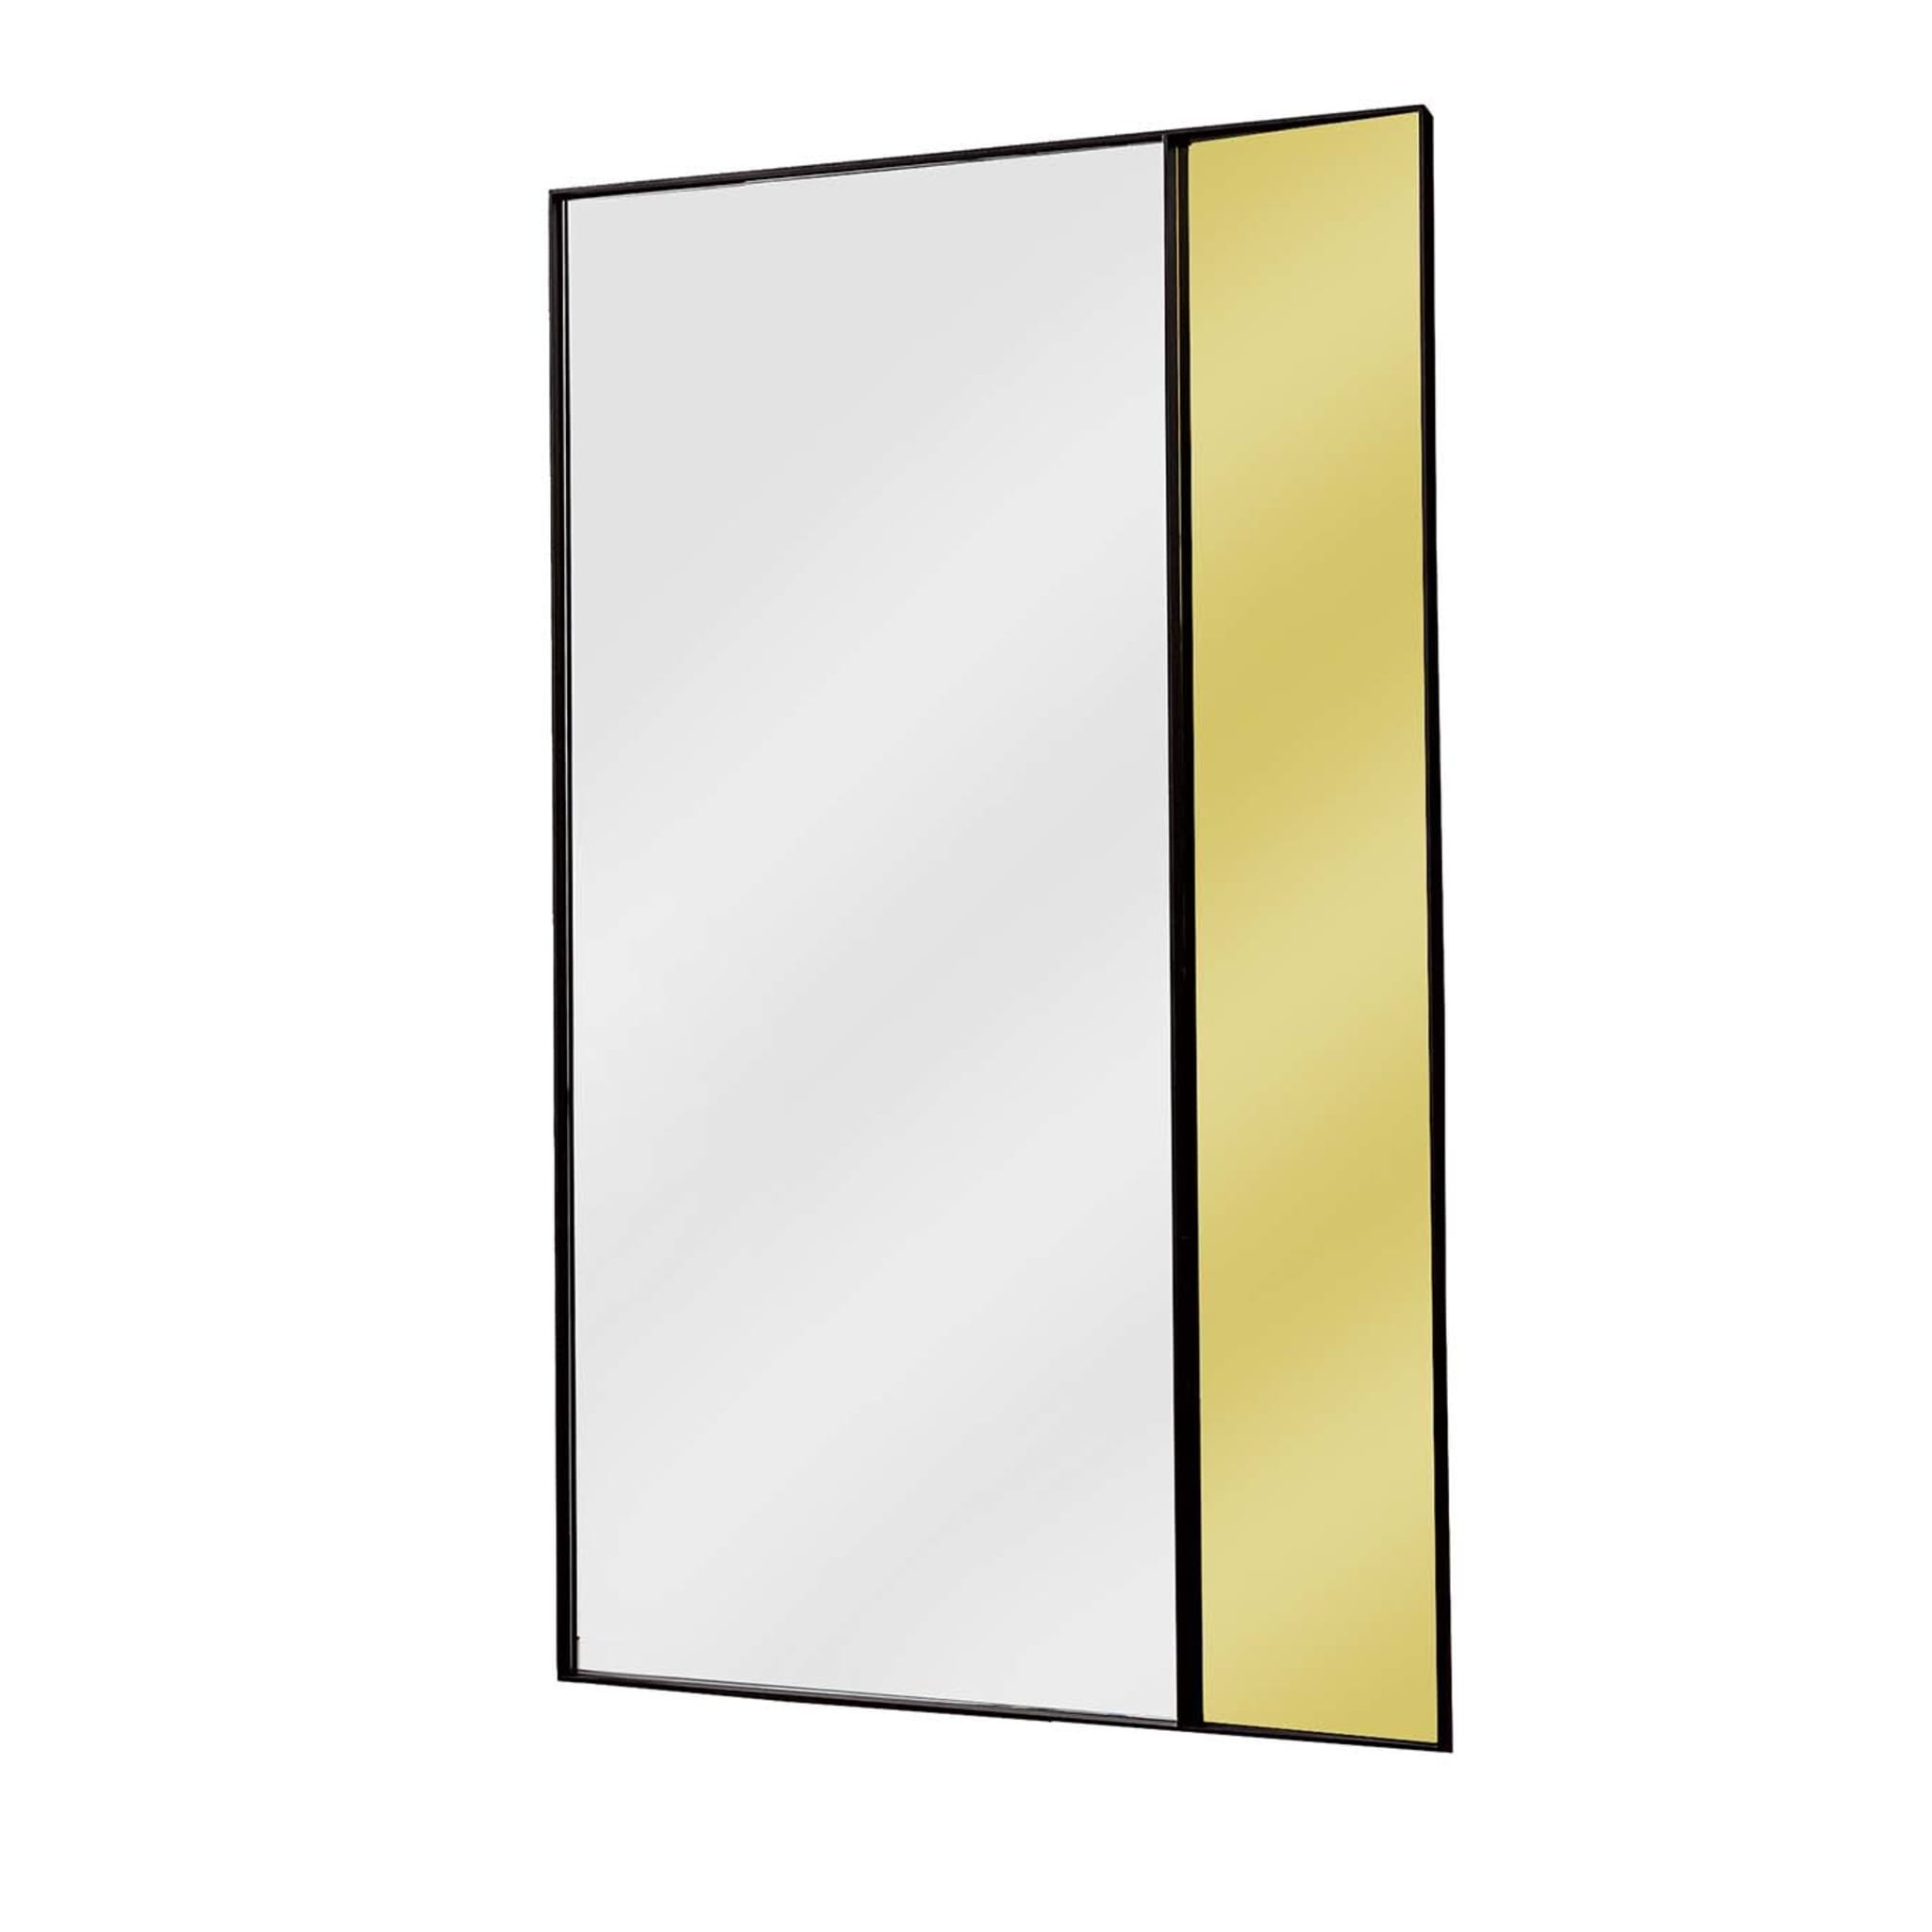 Campos Vertical Mirror in Extralight and Gold  - Main view